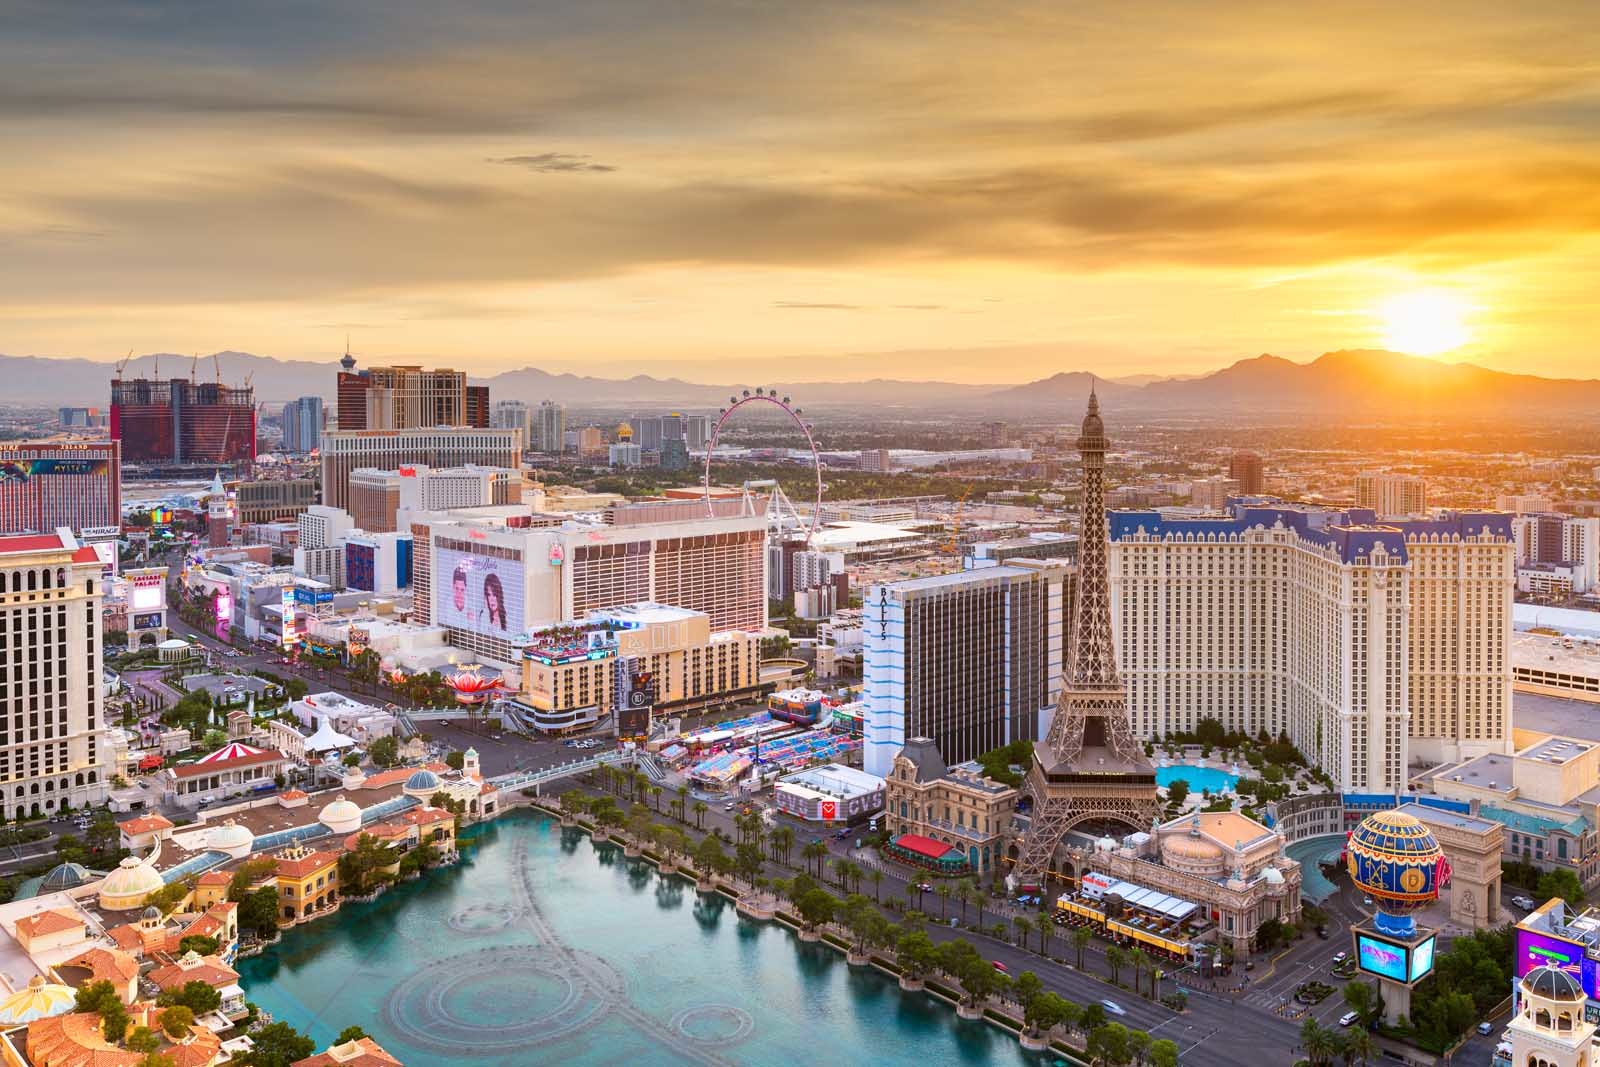 Where to stay in Las Vegas The Best Places and Hotels